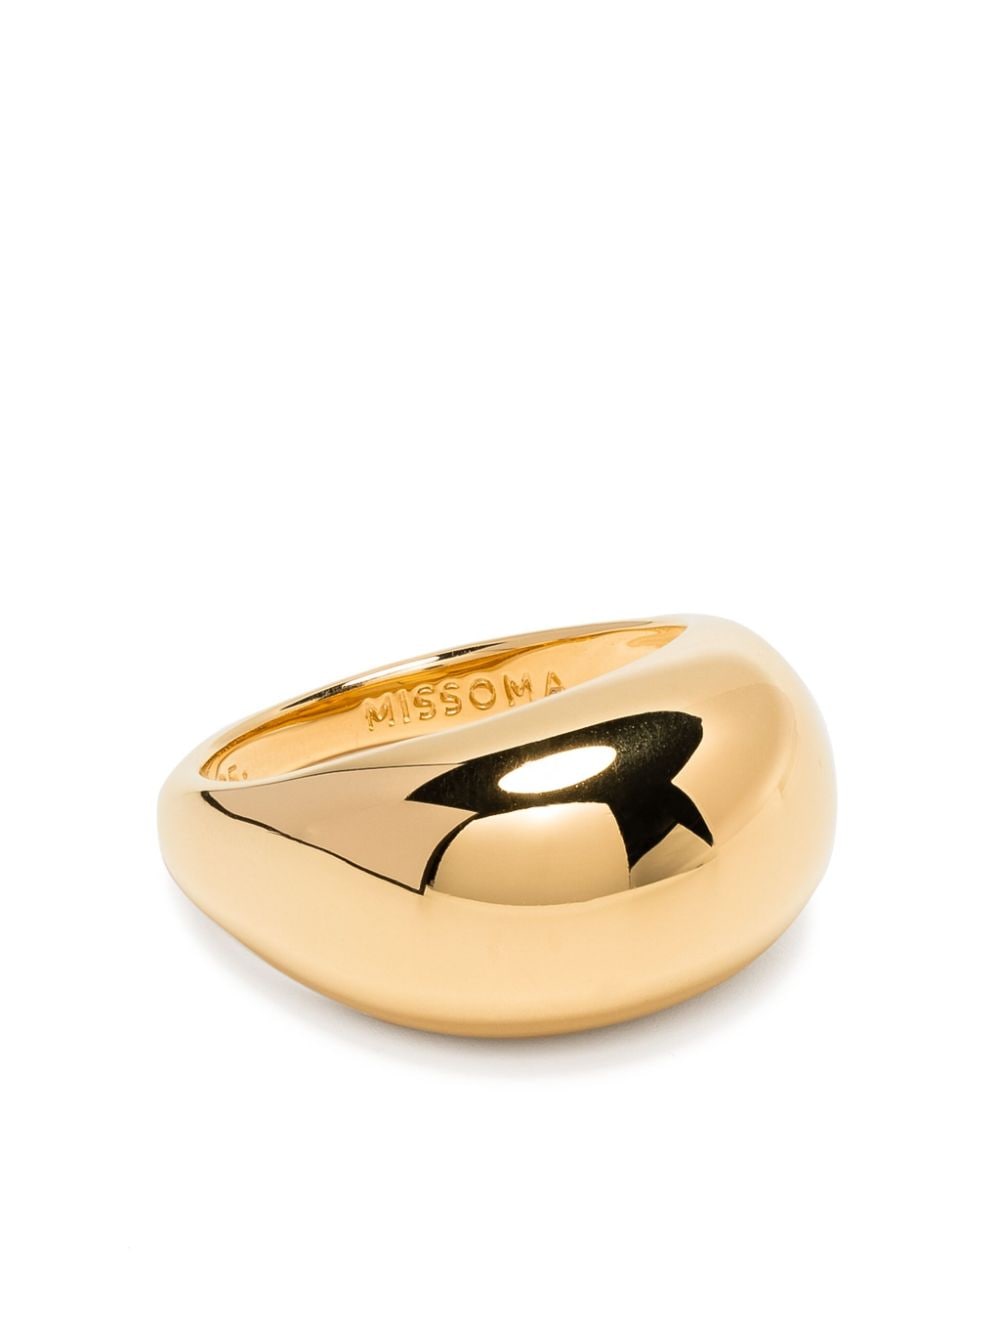 Missoma gold-plated sterling silver Chubby dome ring von Missoma